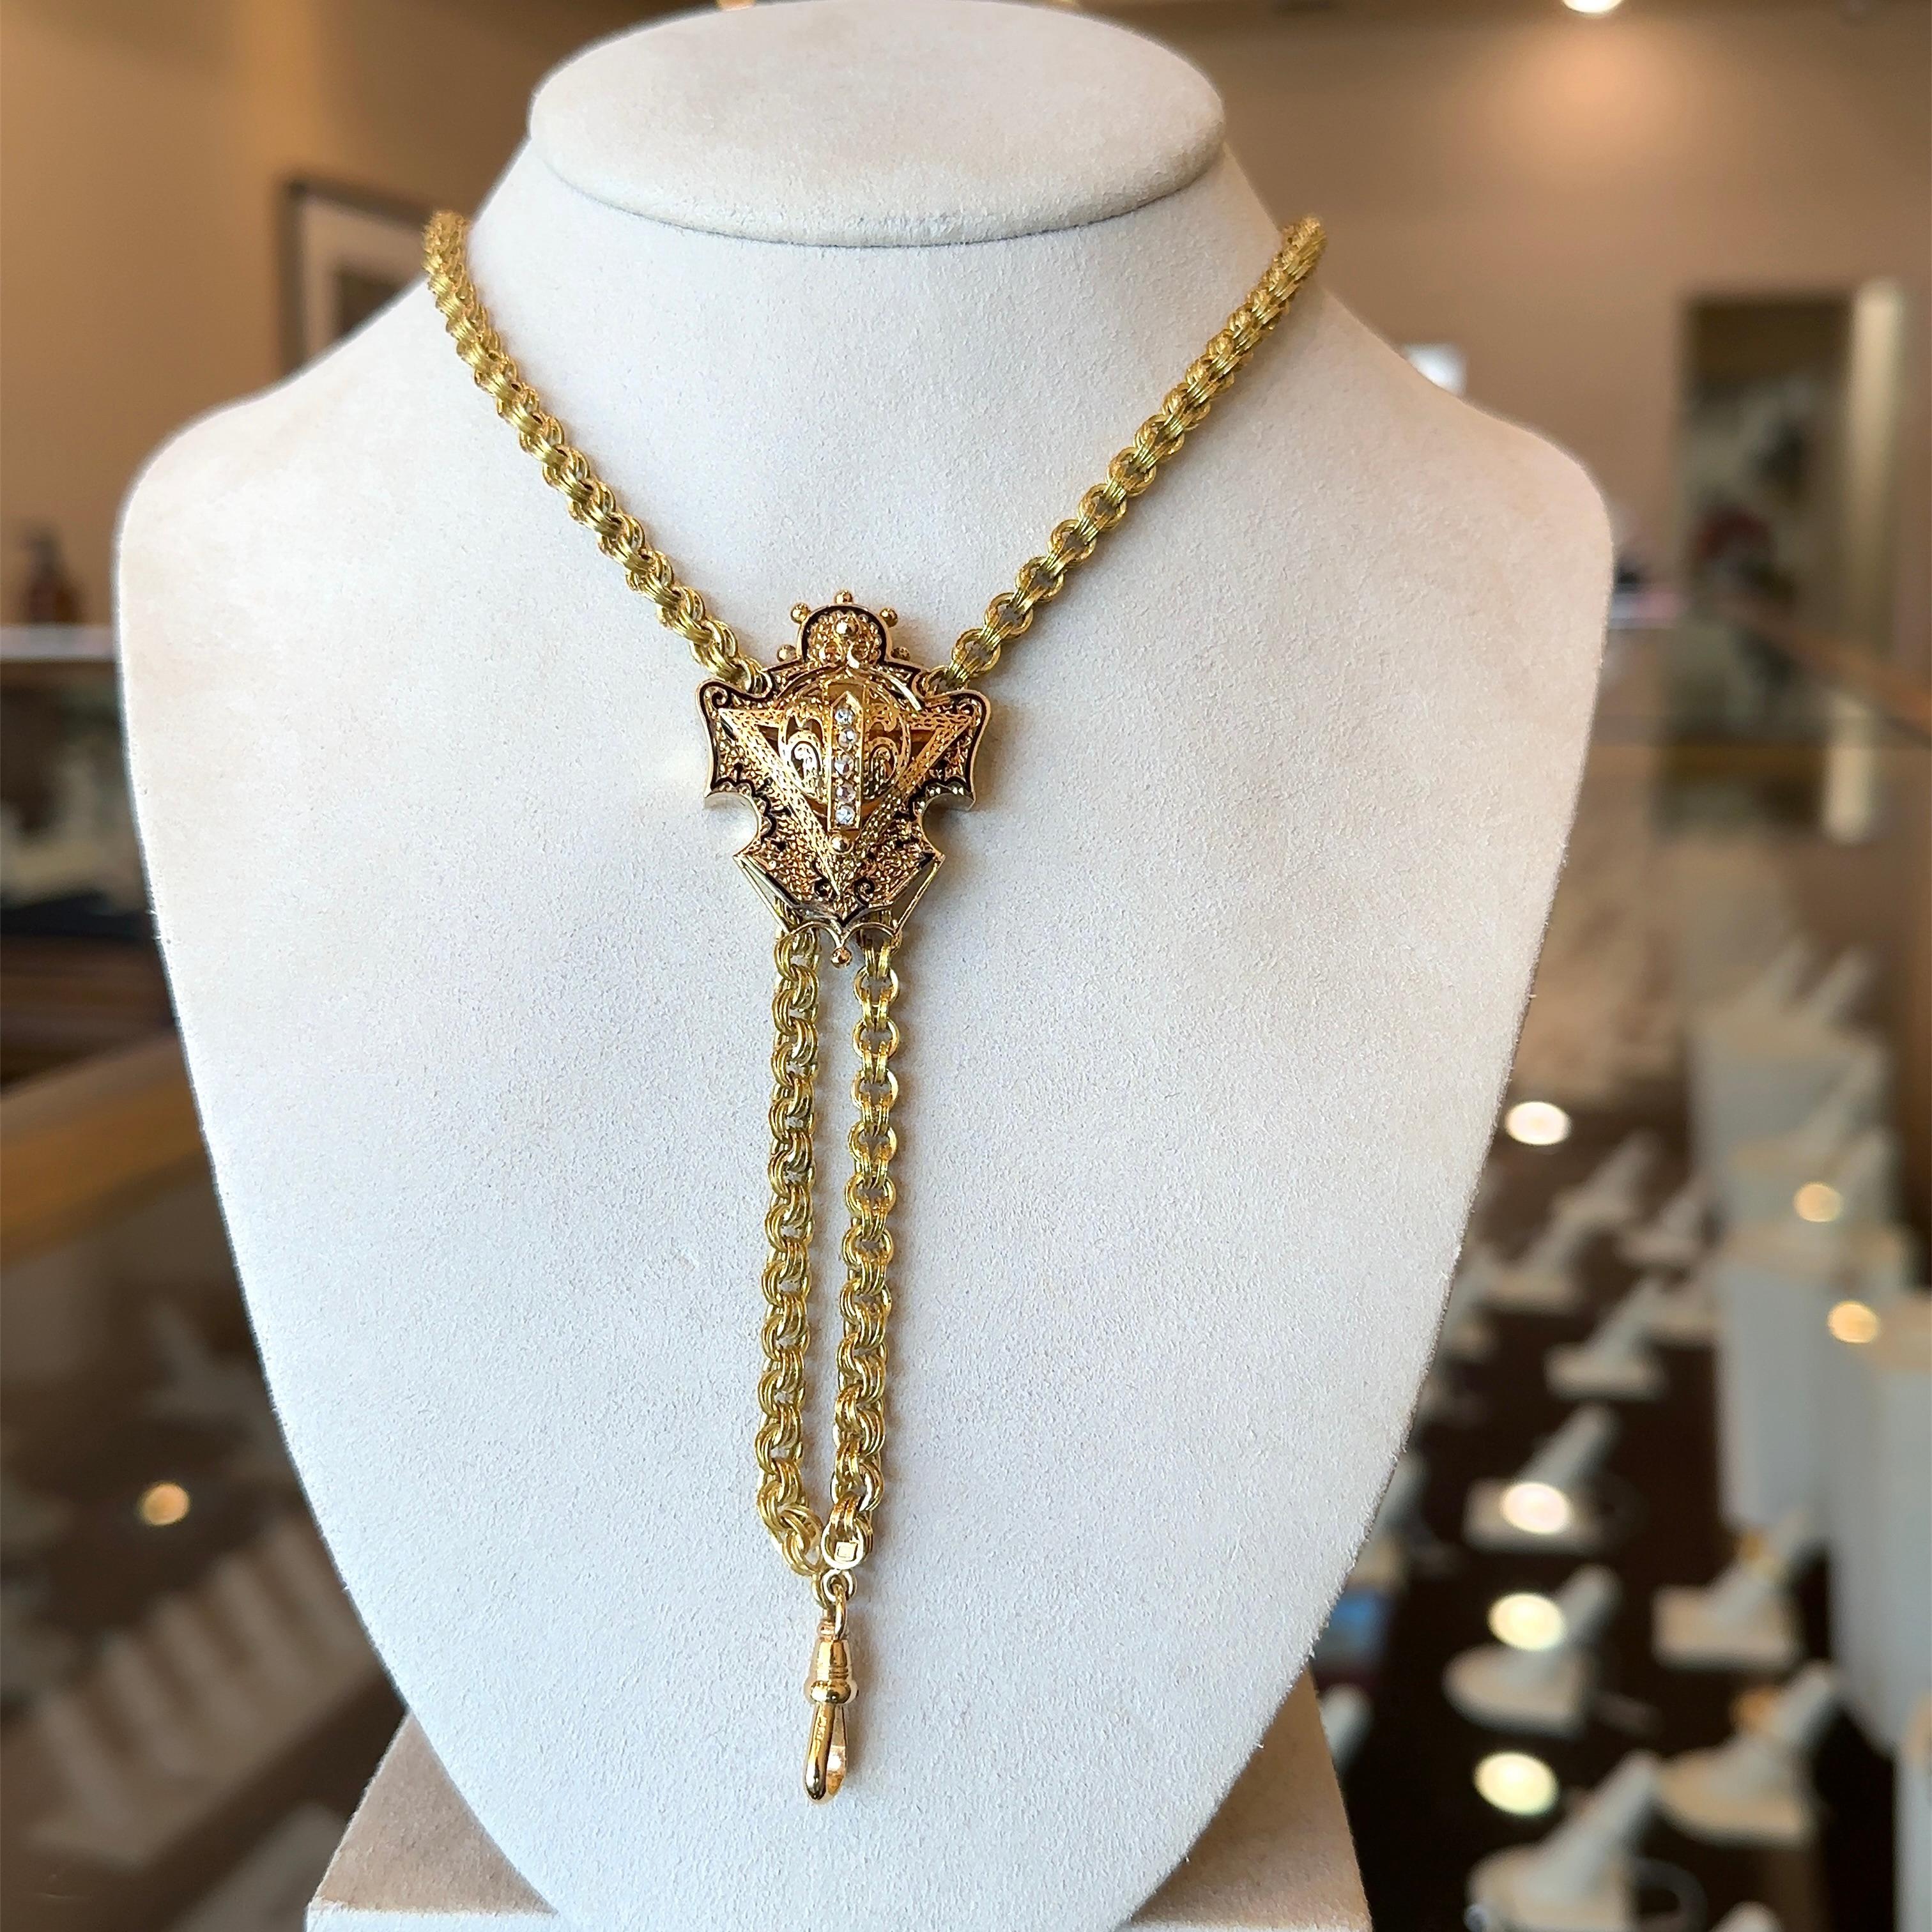 This antique chain dates from the early-1900s. The chain is 15K yellow gold, that can appear as green-gold in color depending on the lighting. The double rolo chain links measure approximately 4.3mm wide. The full length of the chain measures